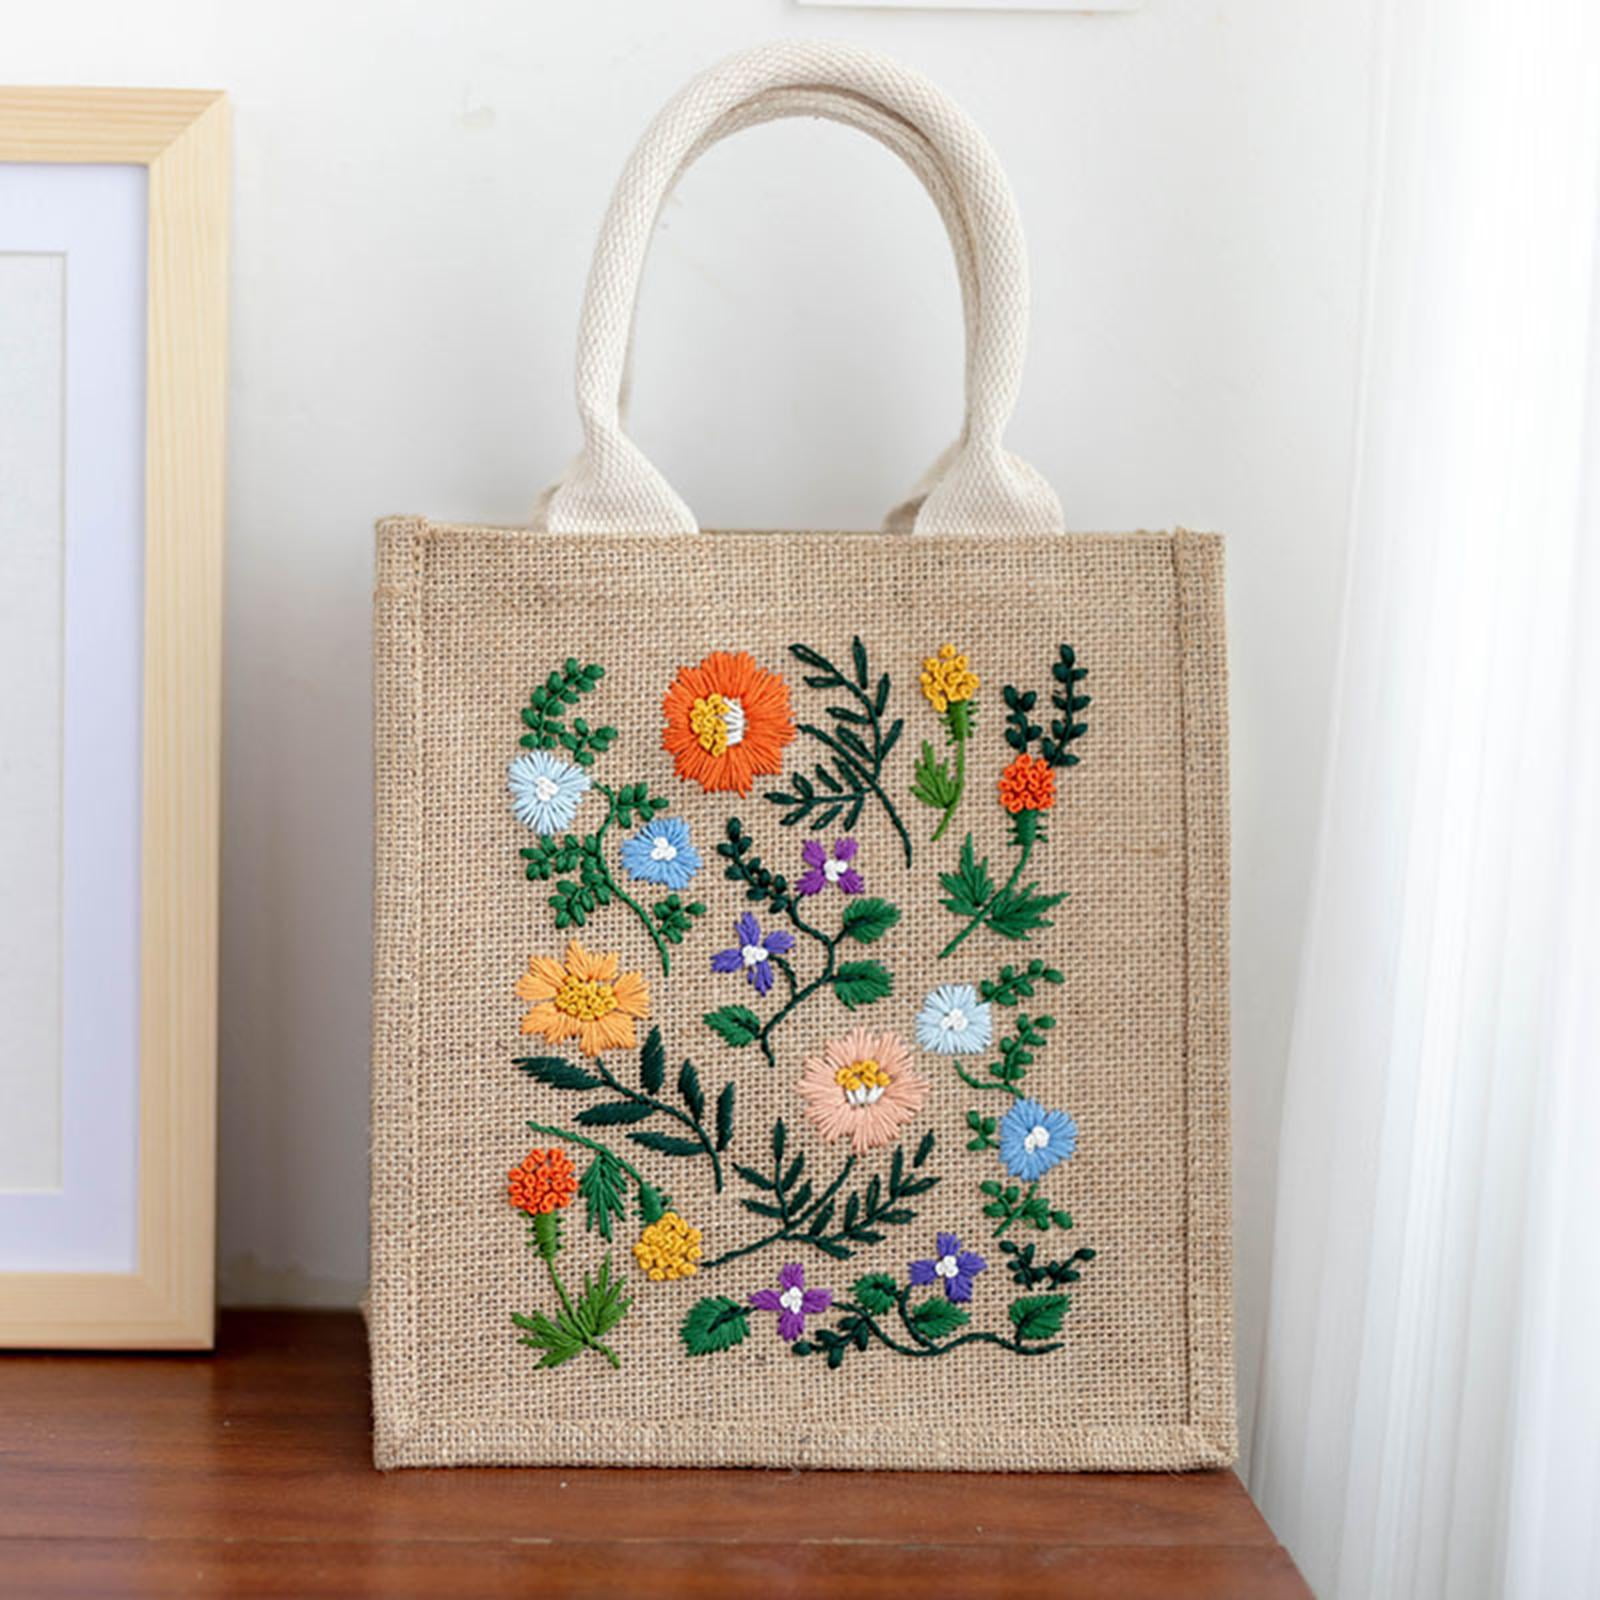 Outstanding Hand made Jute Bags With Embroidery Designs //Jute Ladies Purse  Designs | Jute bags, Jute bags design, Jute tote bags